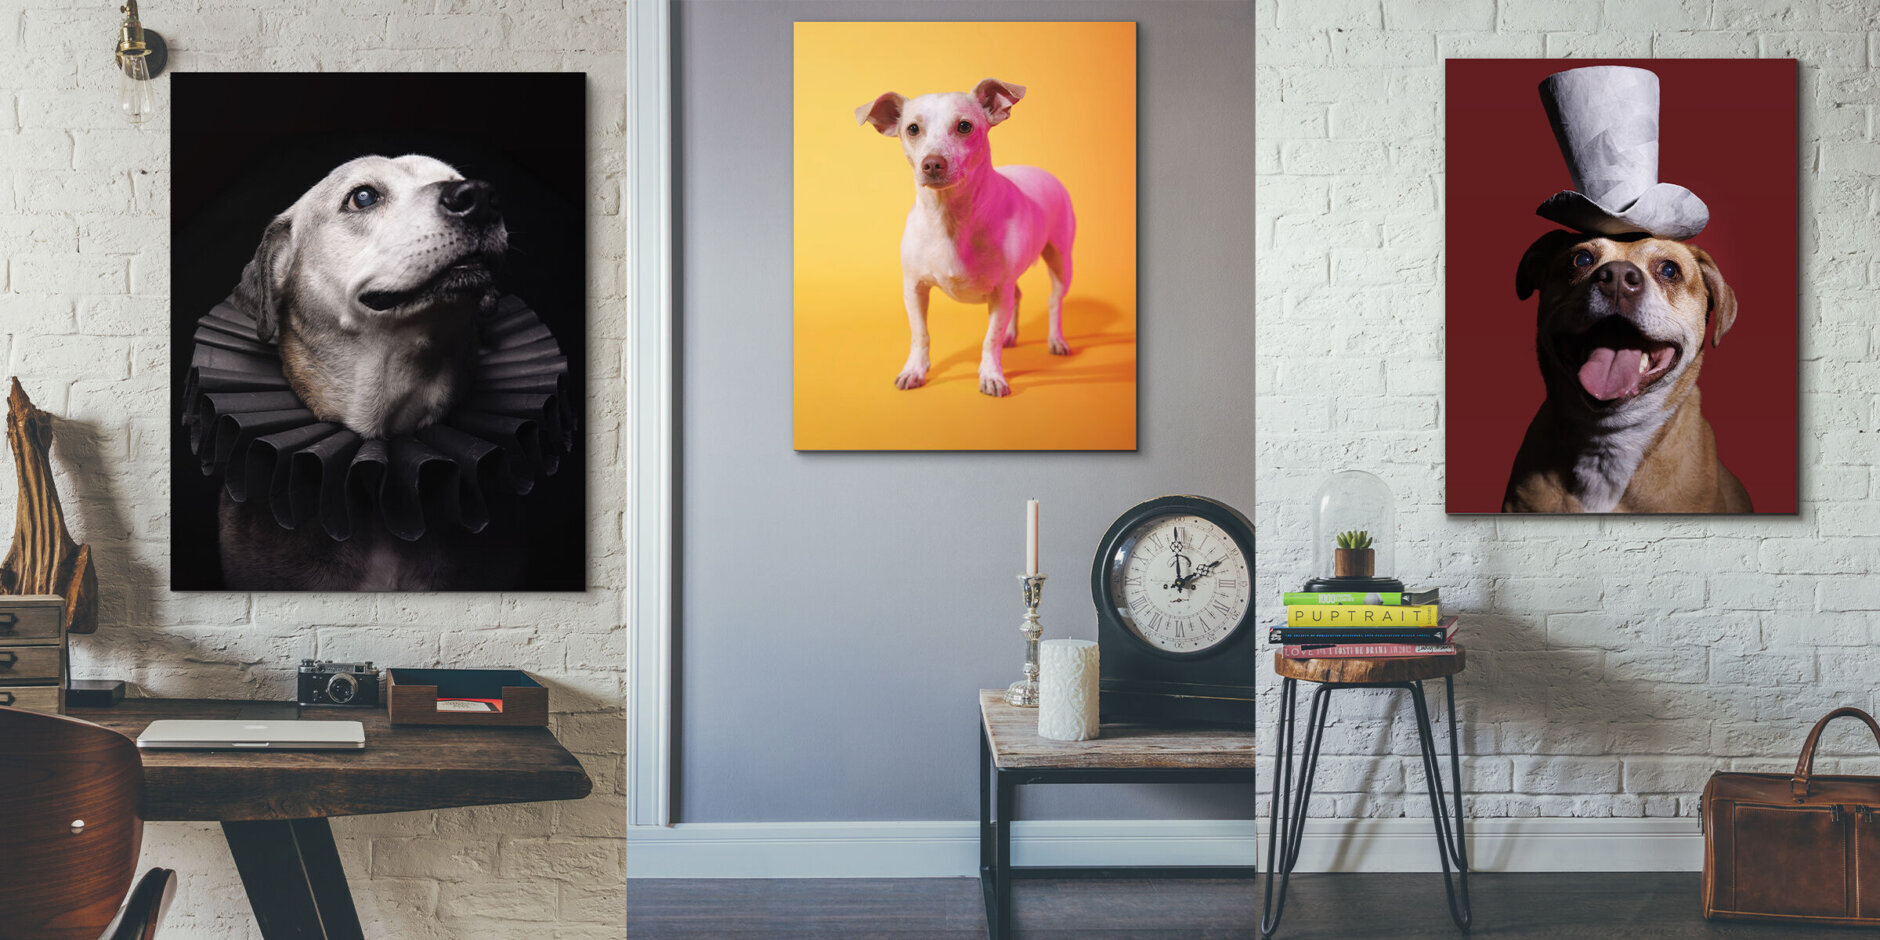 a photo composite shows three portraits of dogs